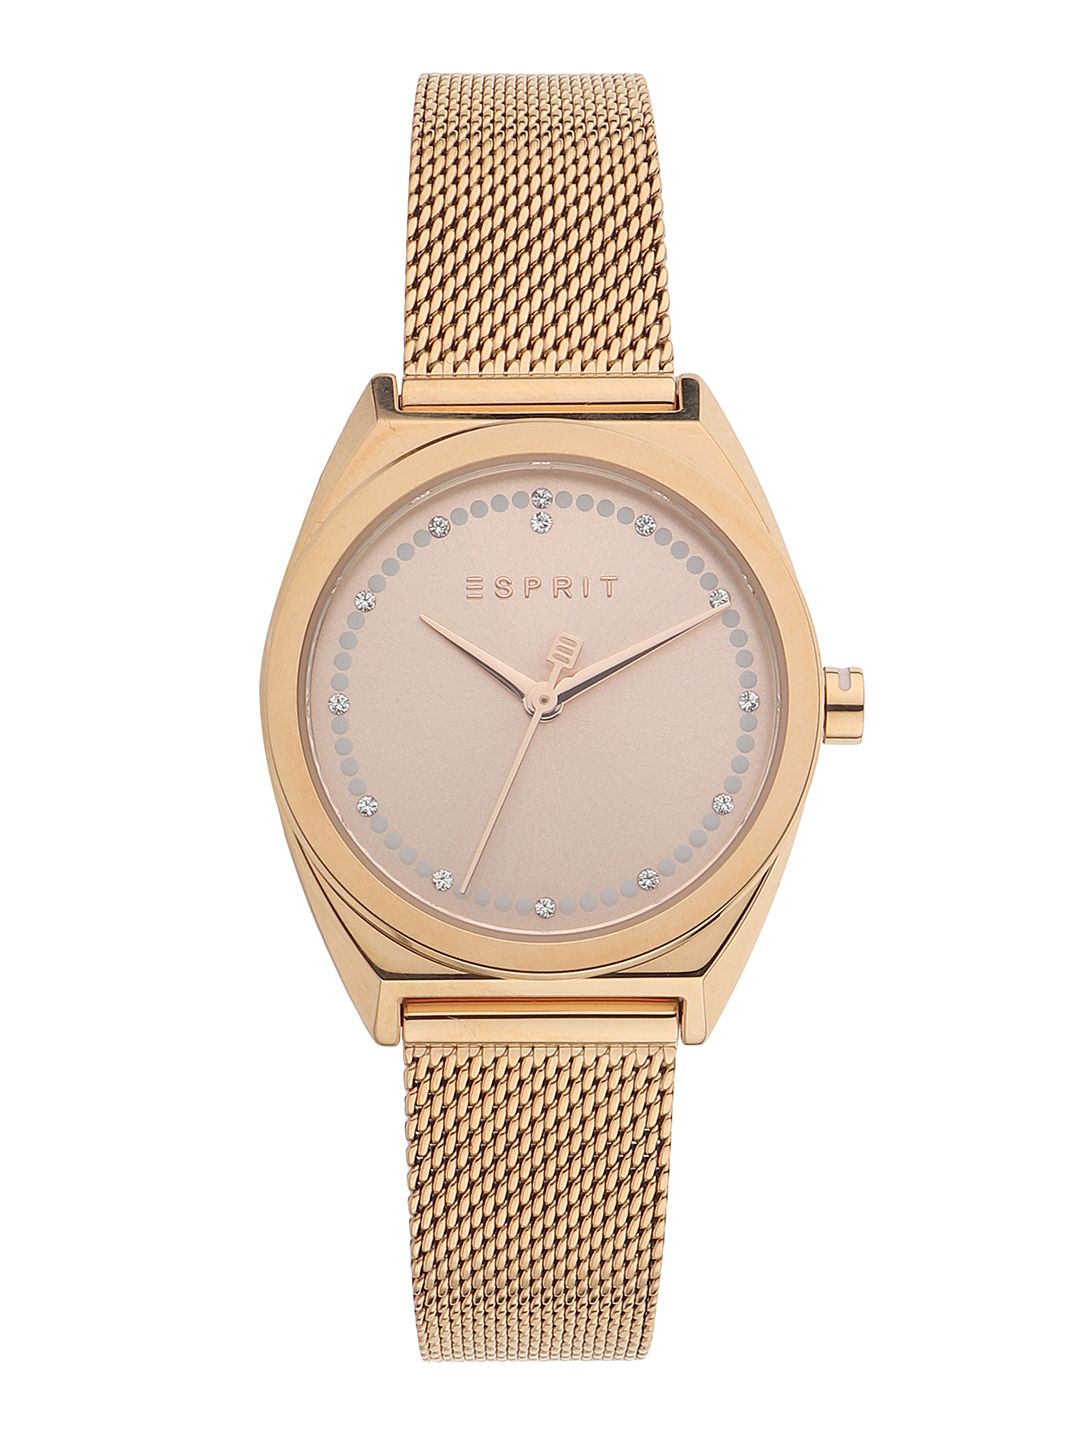 ESPRIT Women Rose Gold-Toned Solid Analogue Watch ES1L100M0075 Price in India